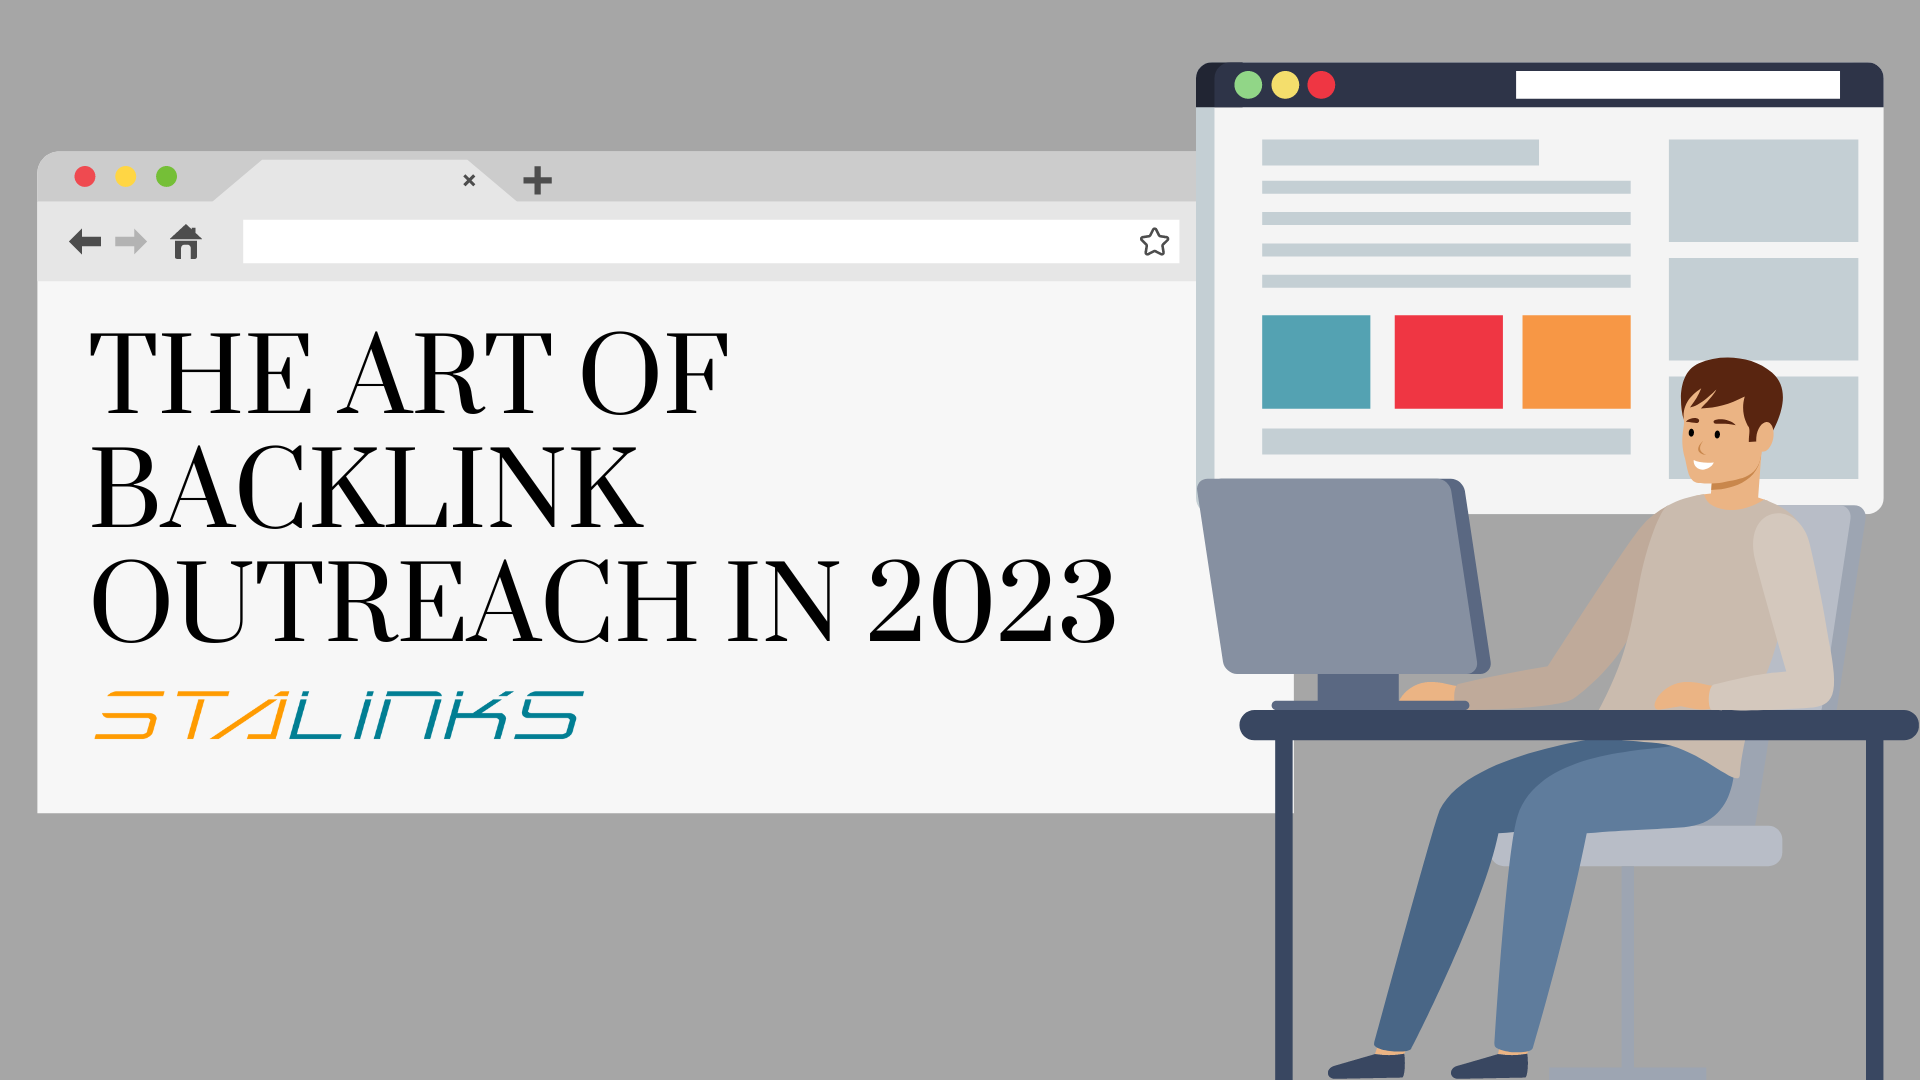 The Art of Backlink Outreach in 2023